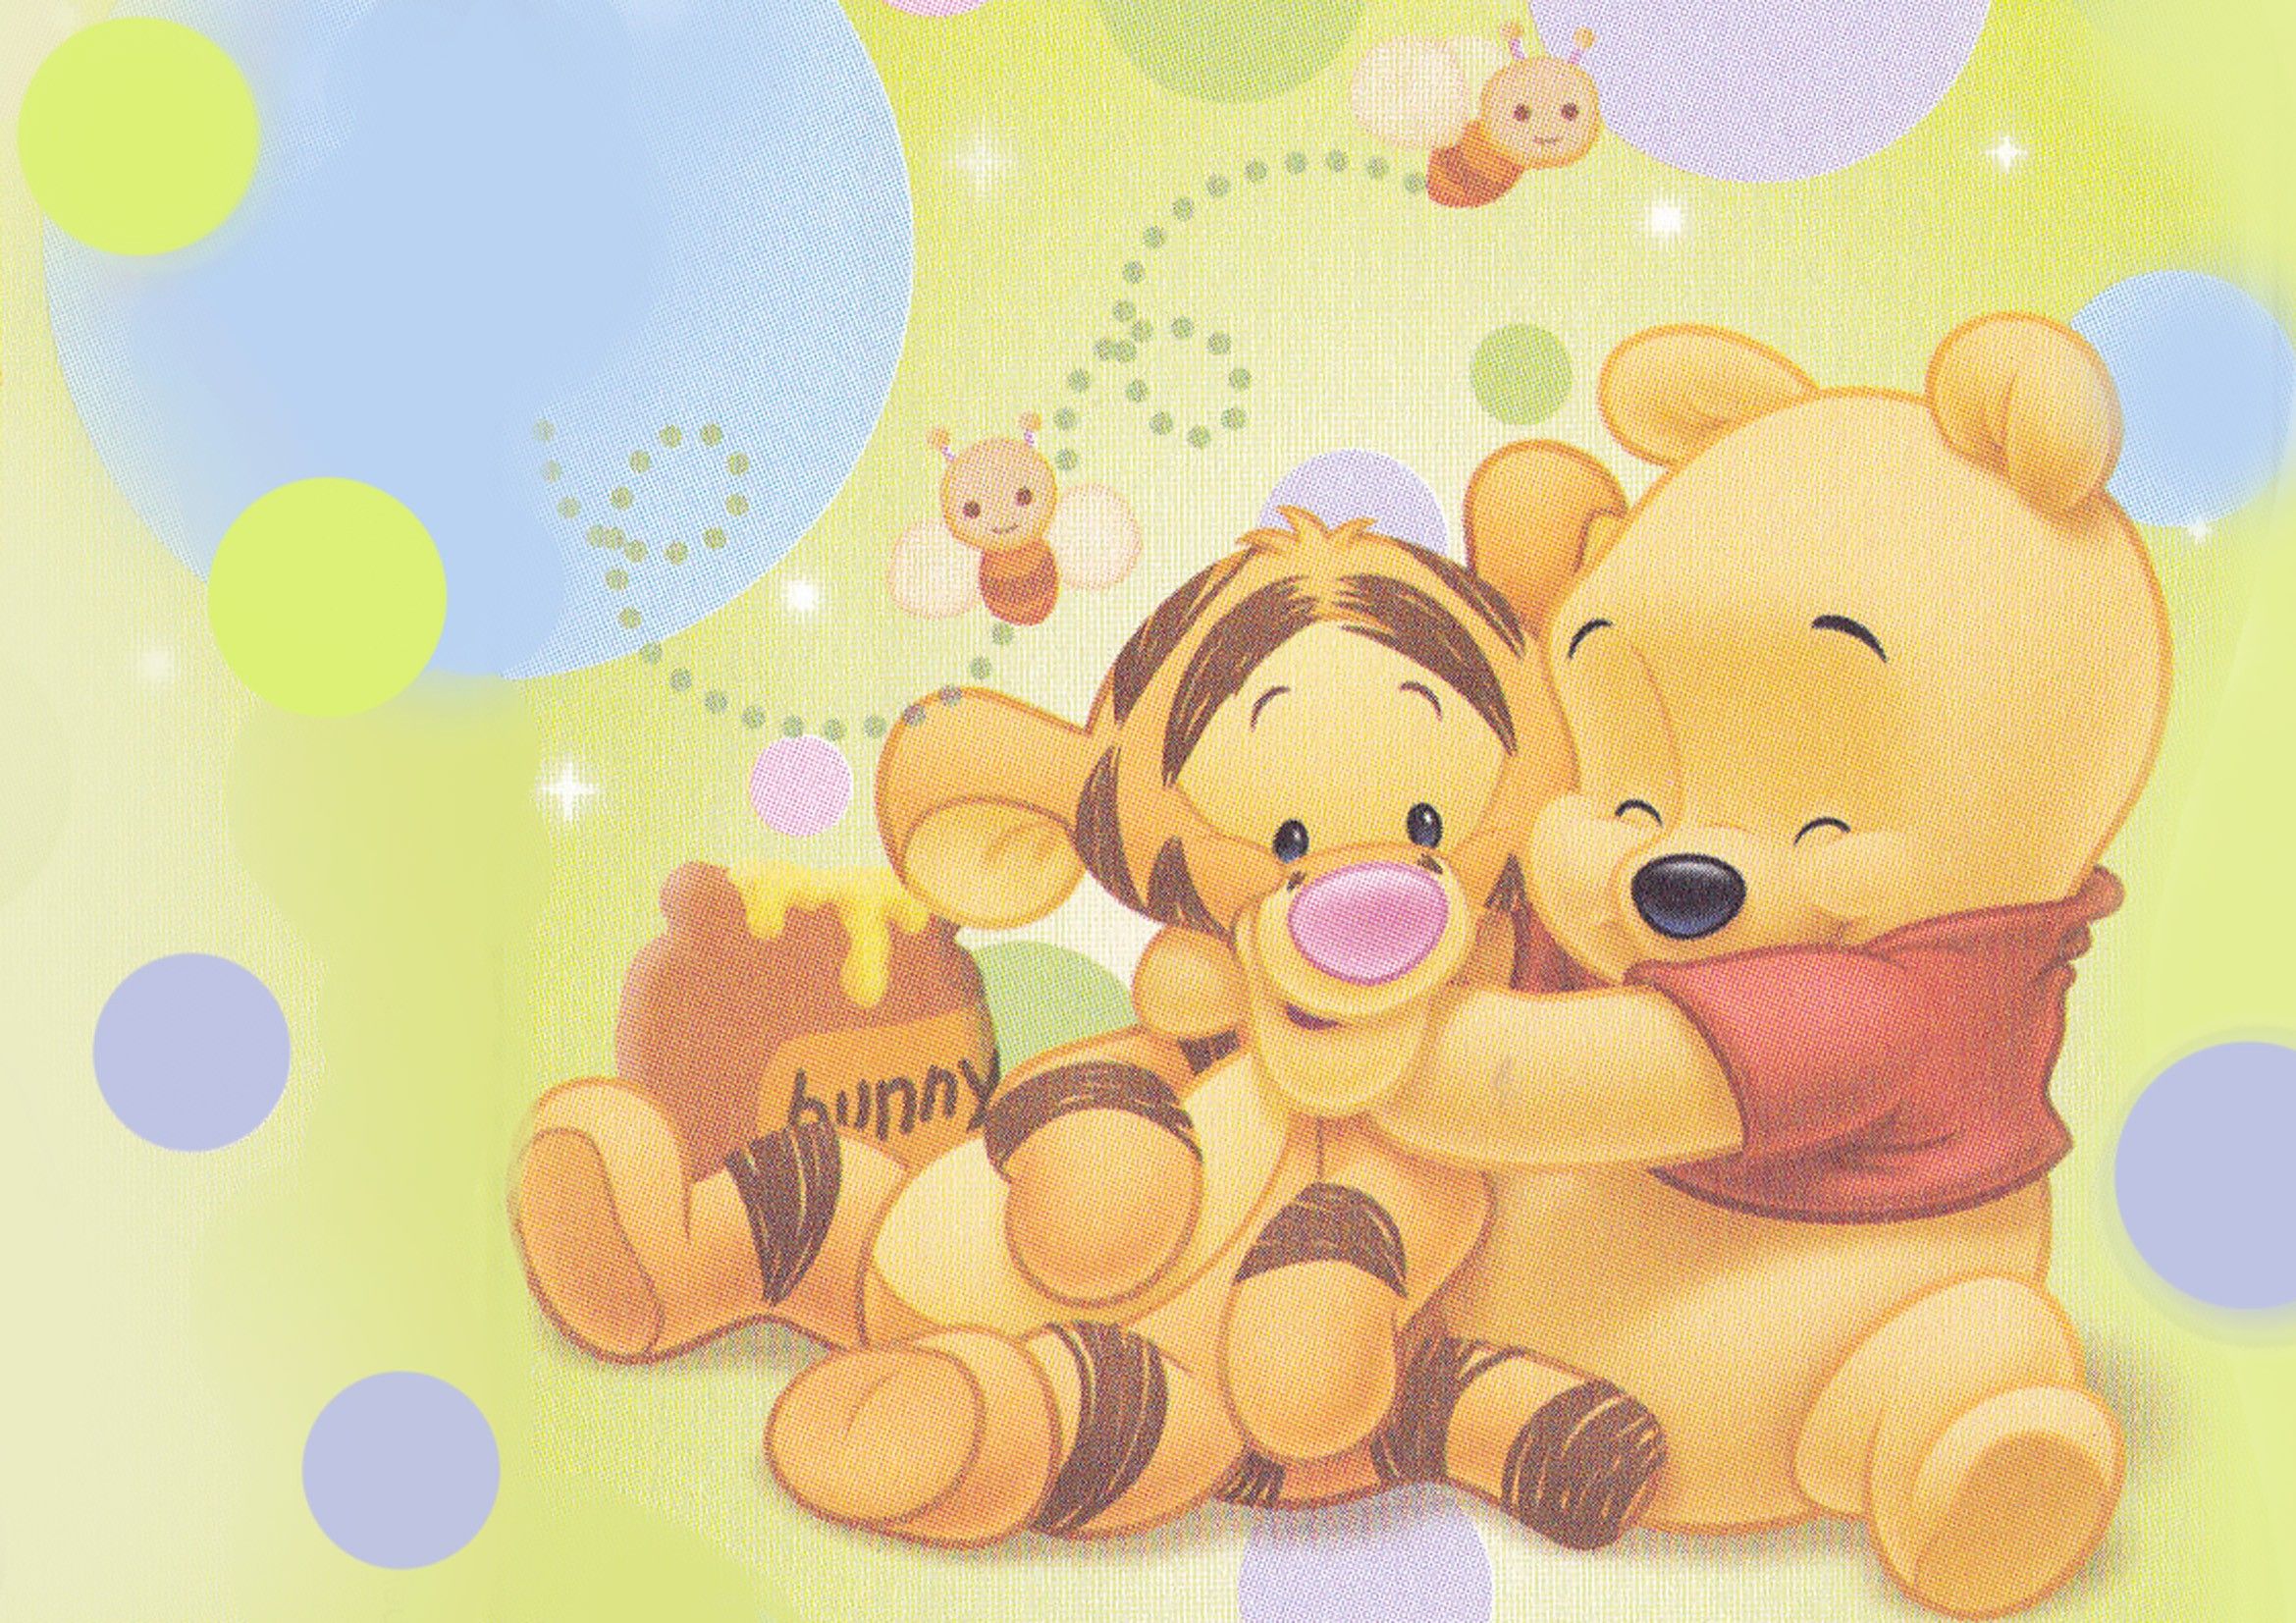 Winnie The Pooh Baby Wallpapers